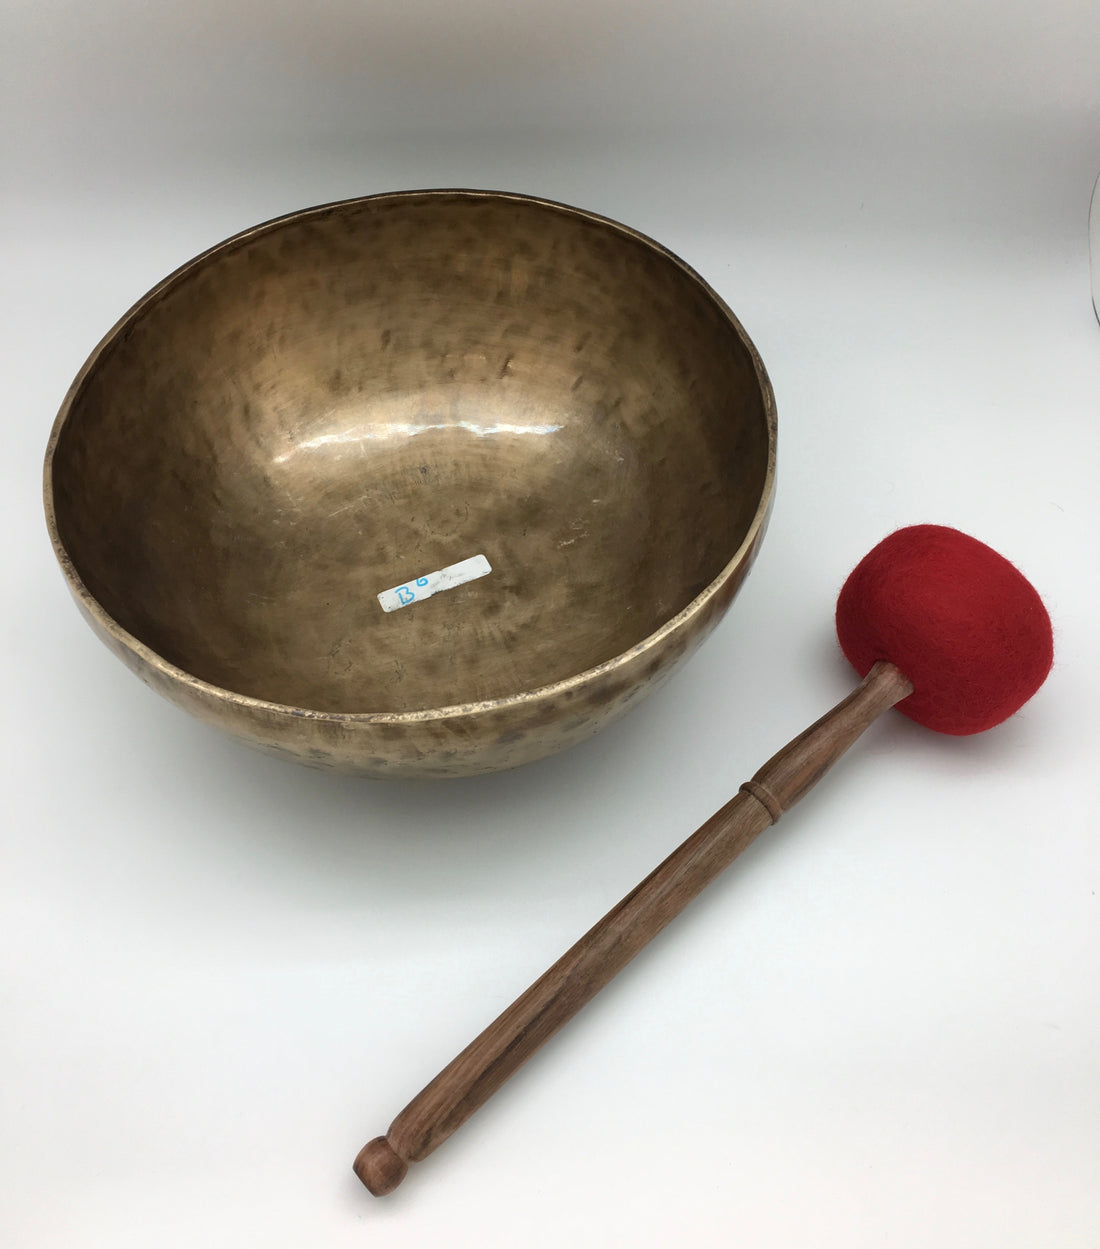 The Art of Making the Singing Bowls